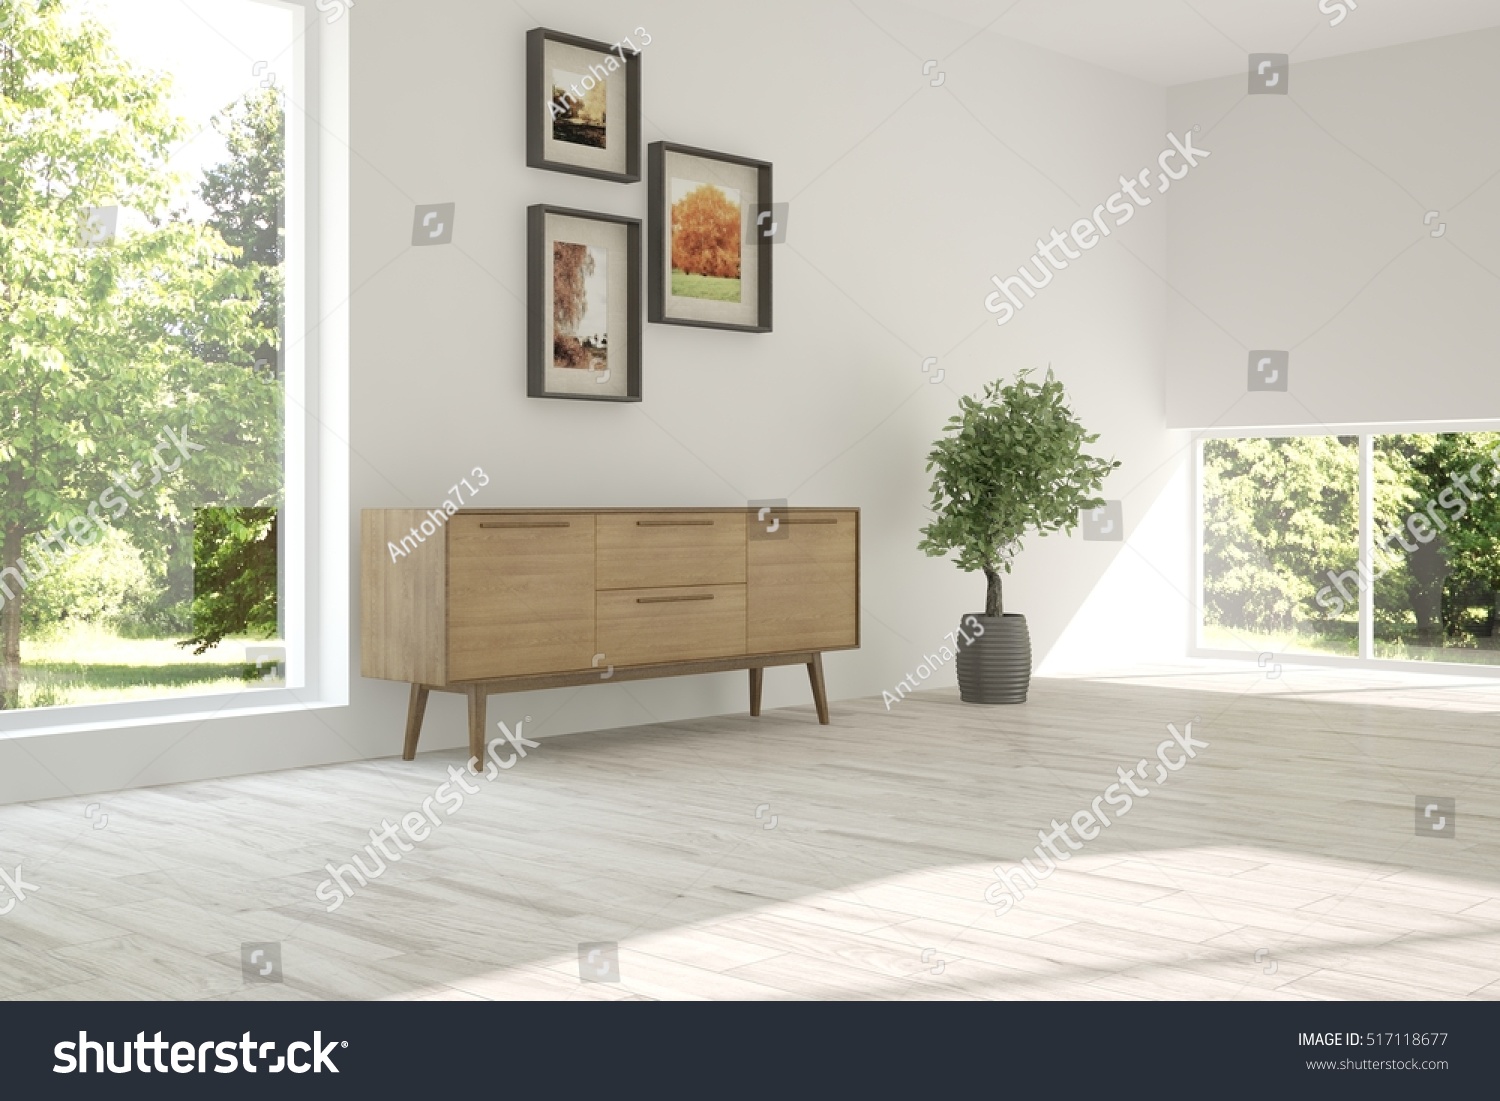 White room with shelf and green landscape in window. Scandinavian interior design. 3D illustration #517118677